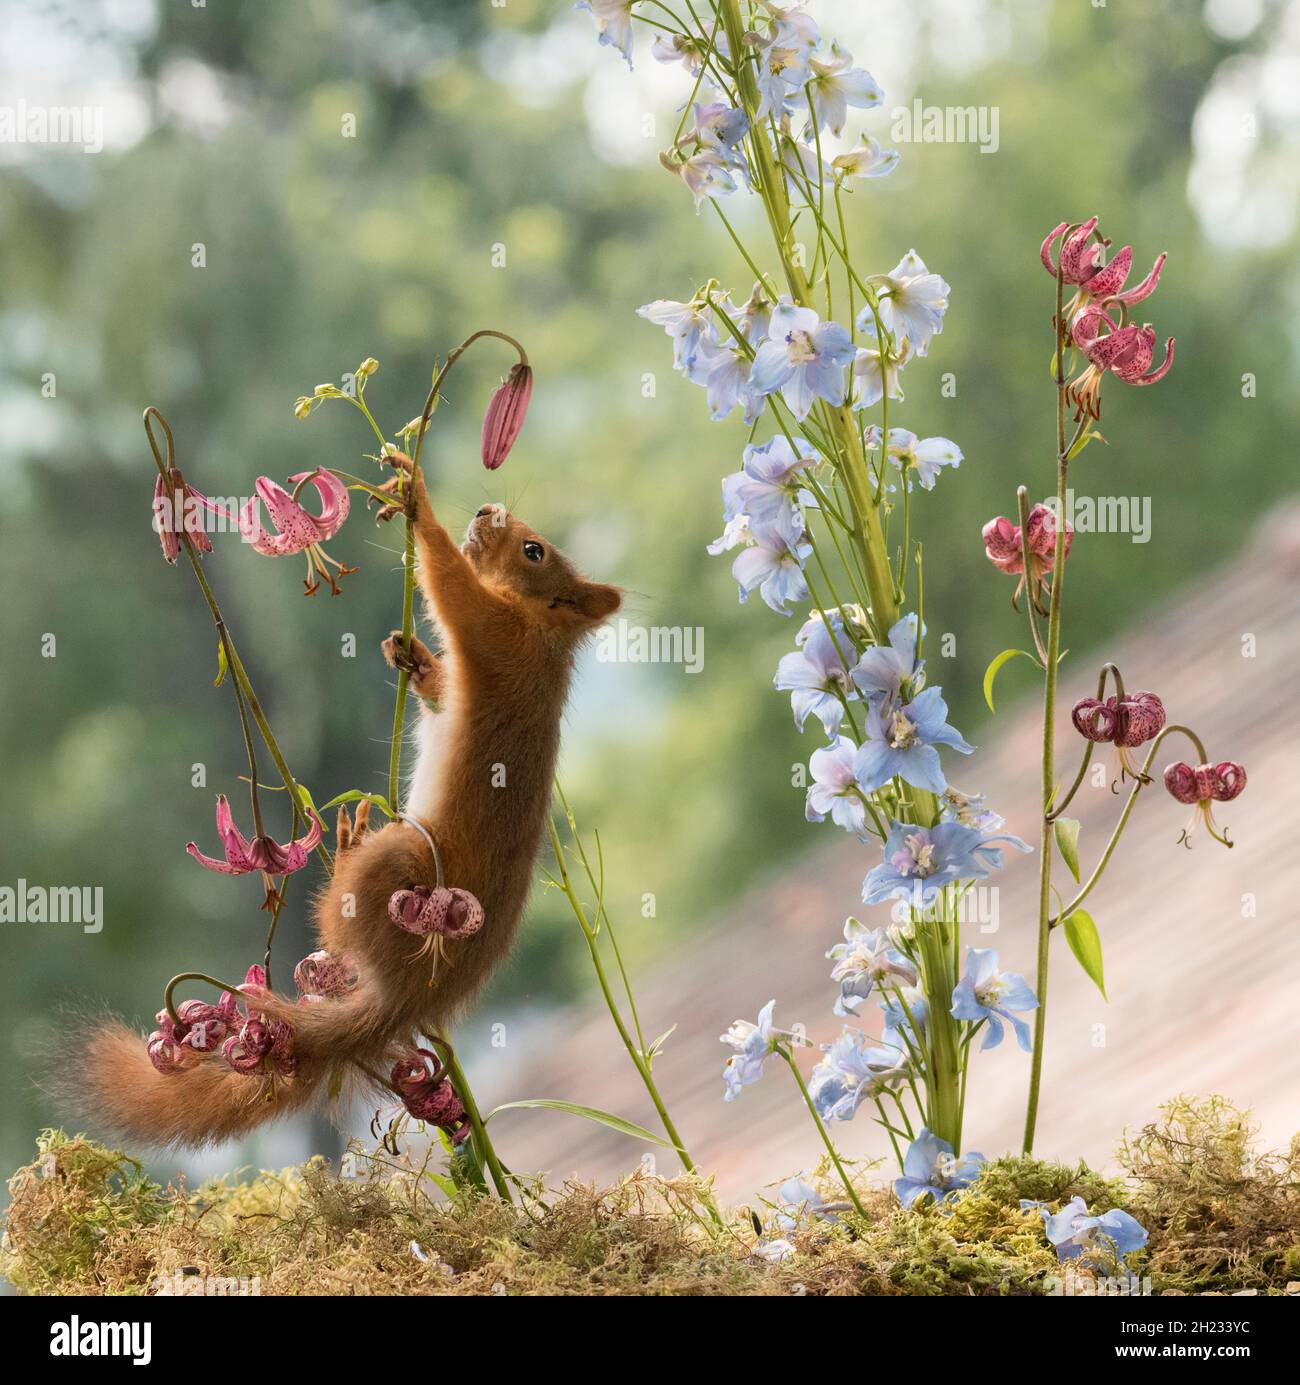 young Red Squirrel climbs in lily flowers Stock Photo